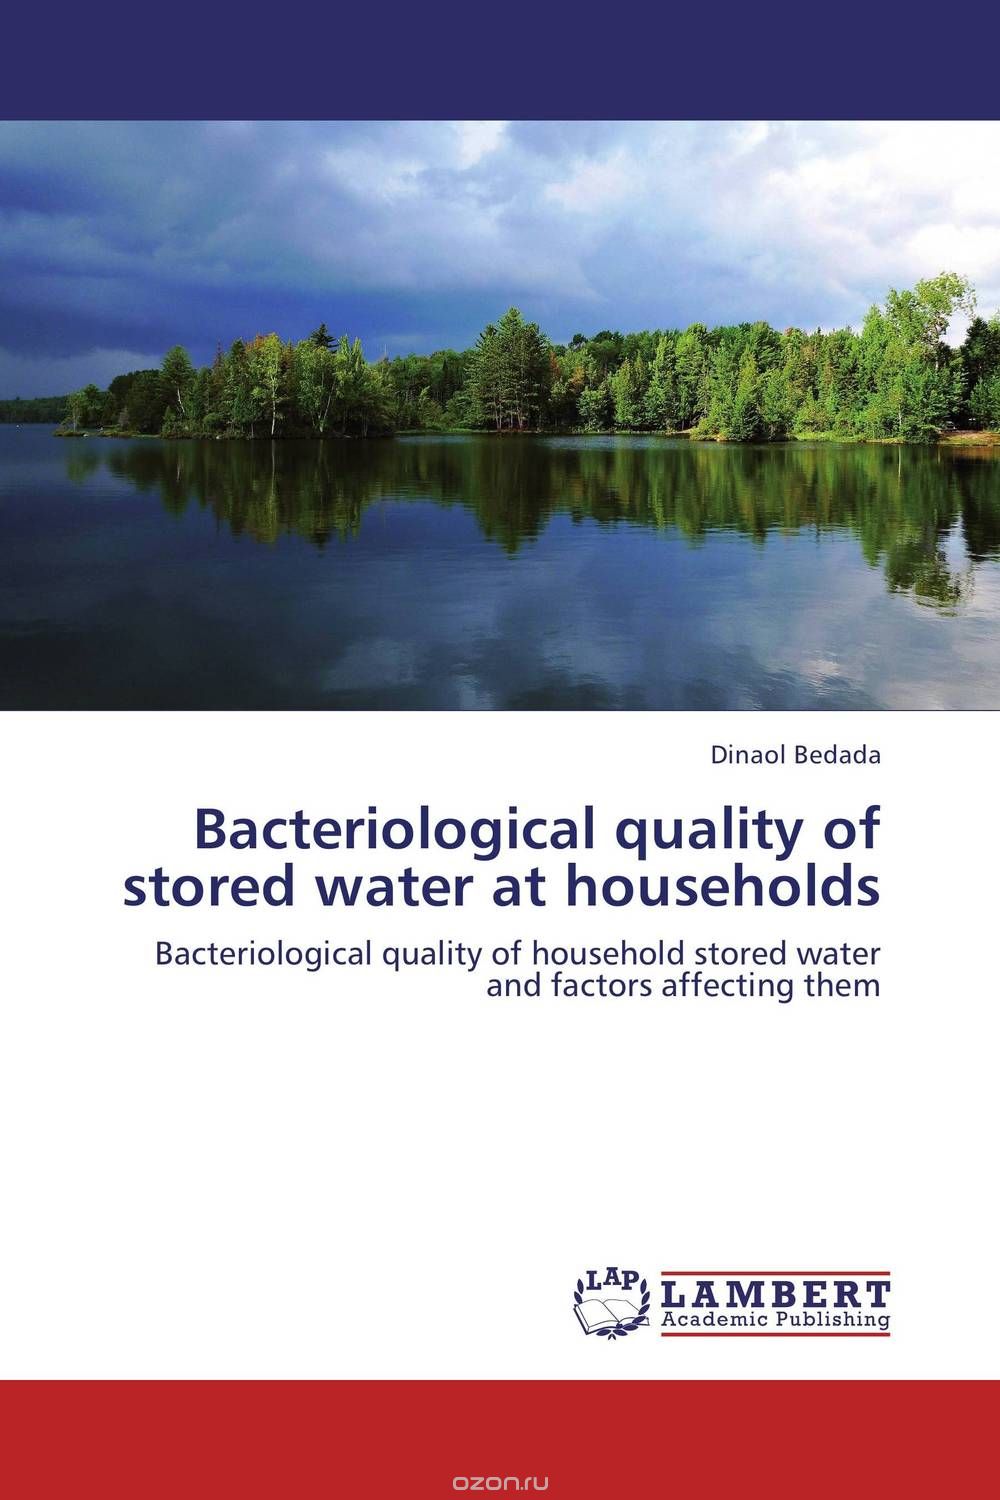 Скачать книгу "Bacteriological quality of stored water at households"